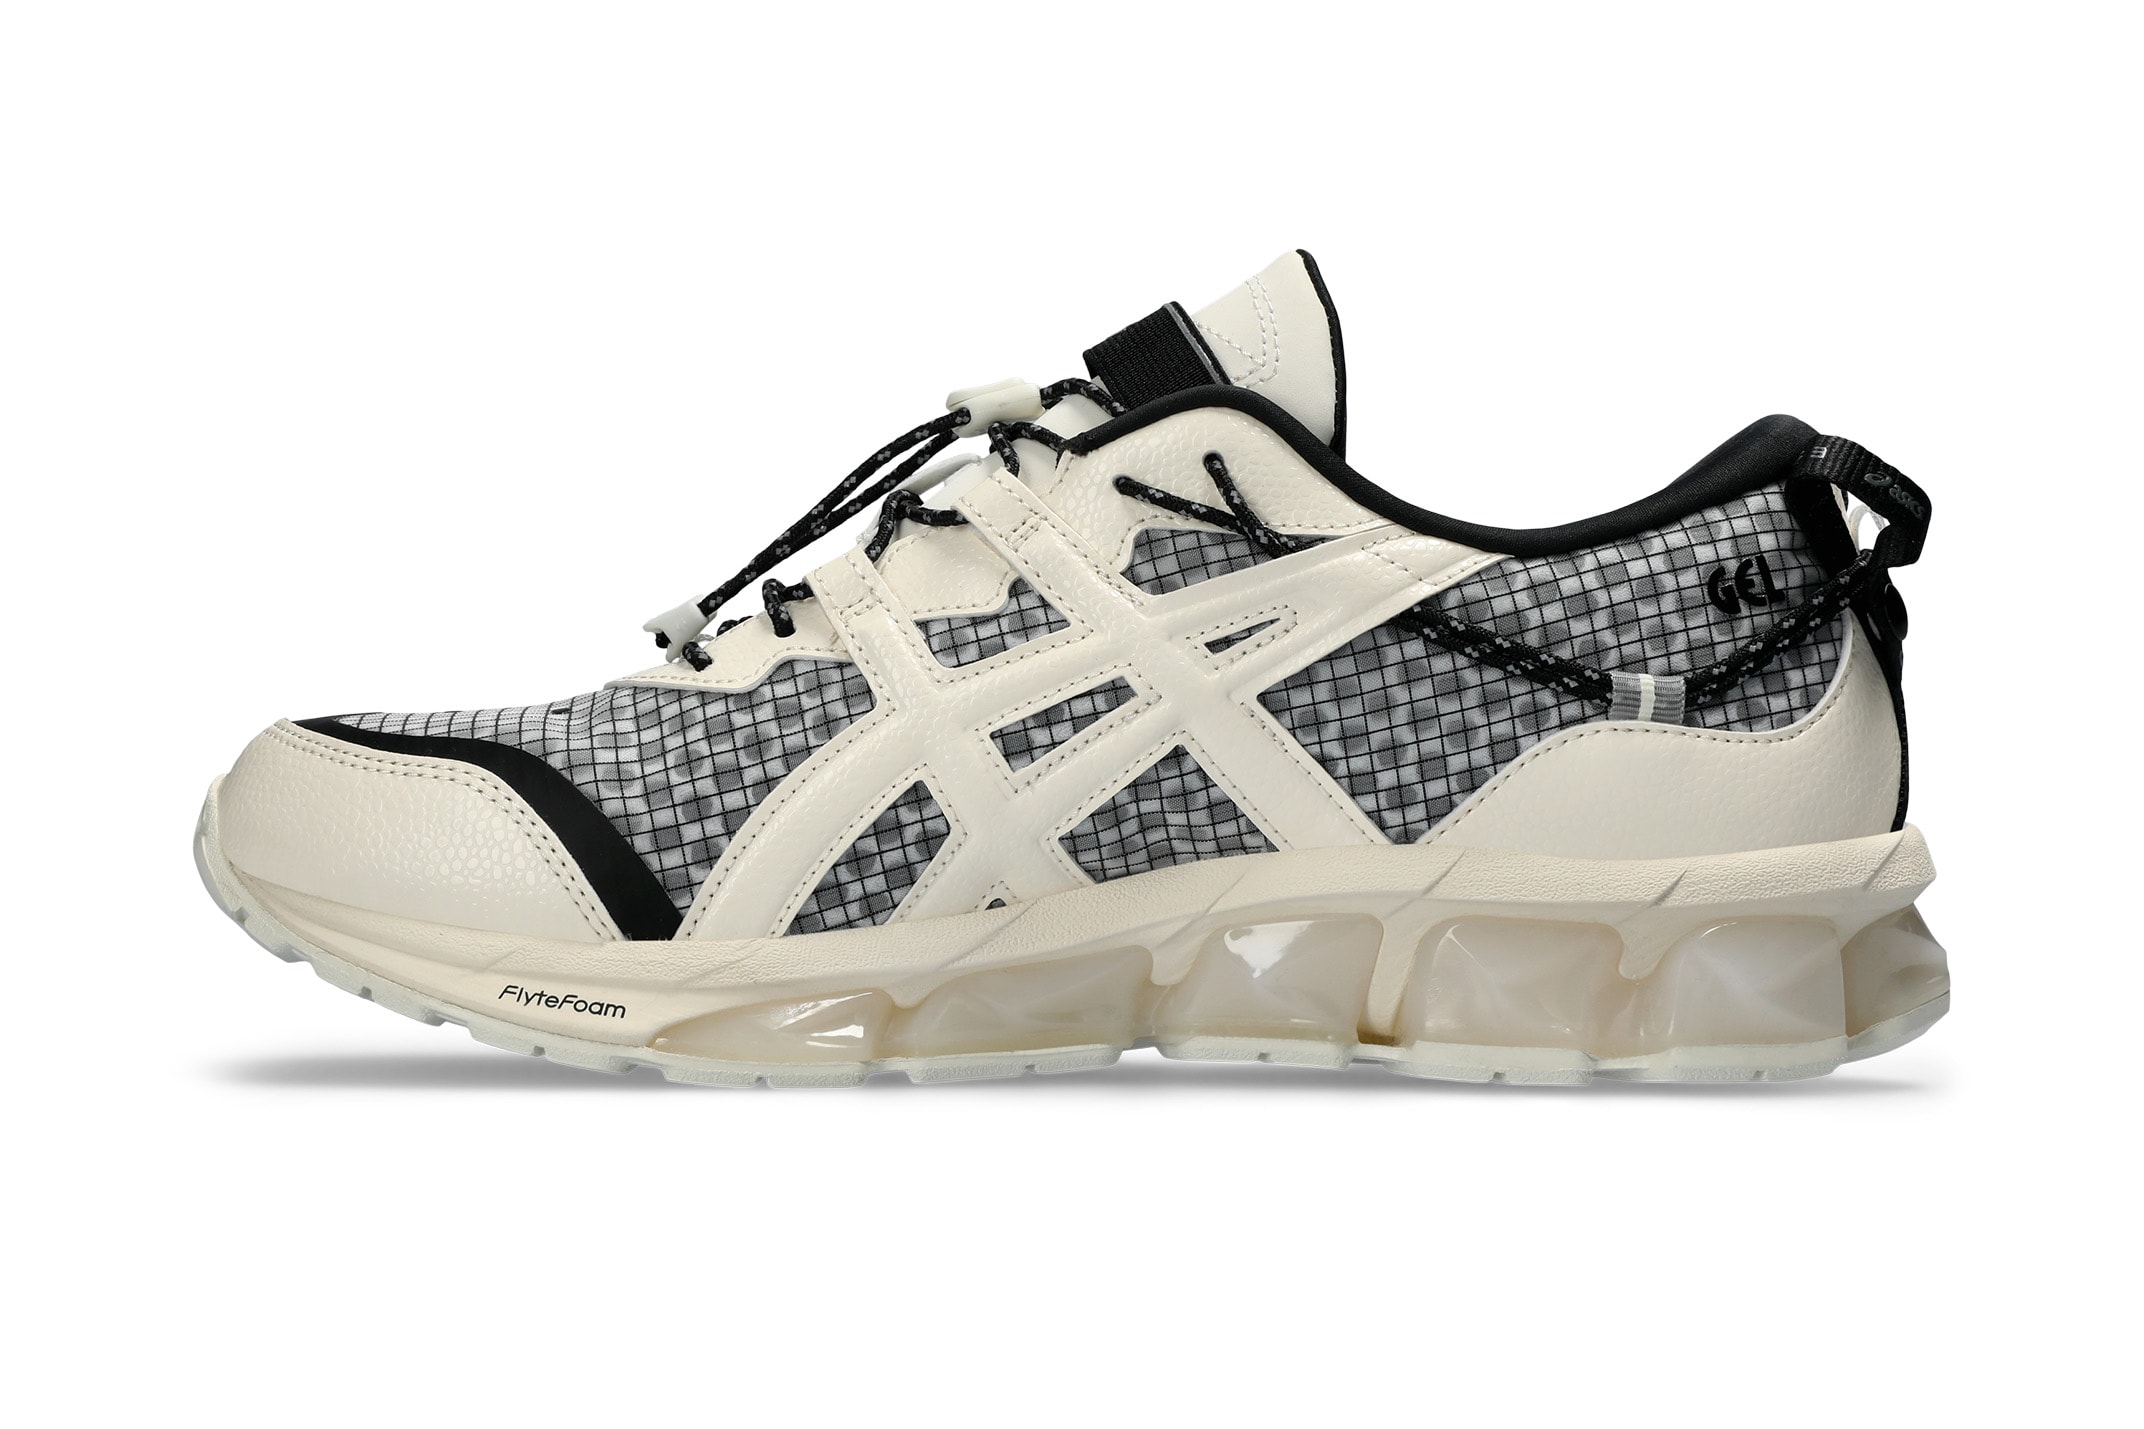 Pace Collaborates with ASICS Sportstyle for GEL-QUANTUM 360 VII Model